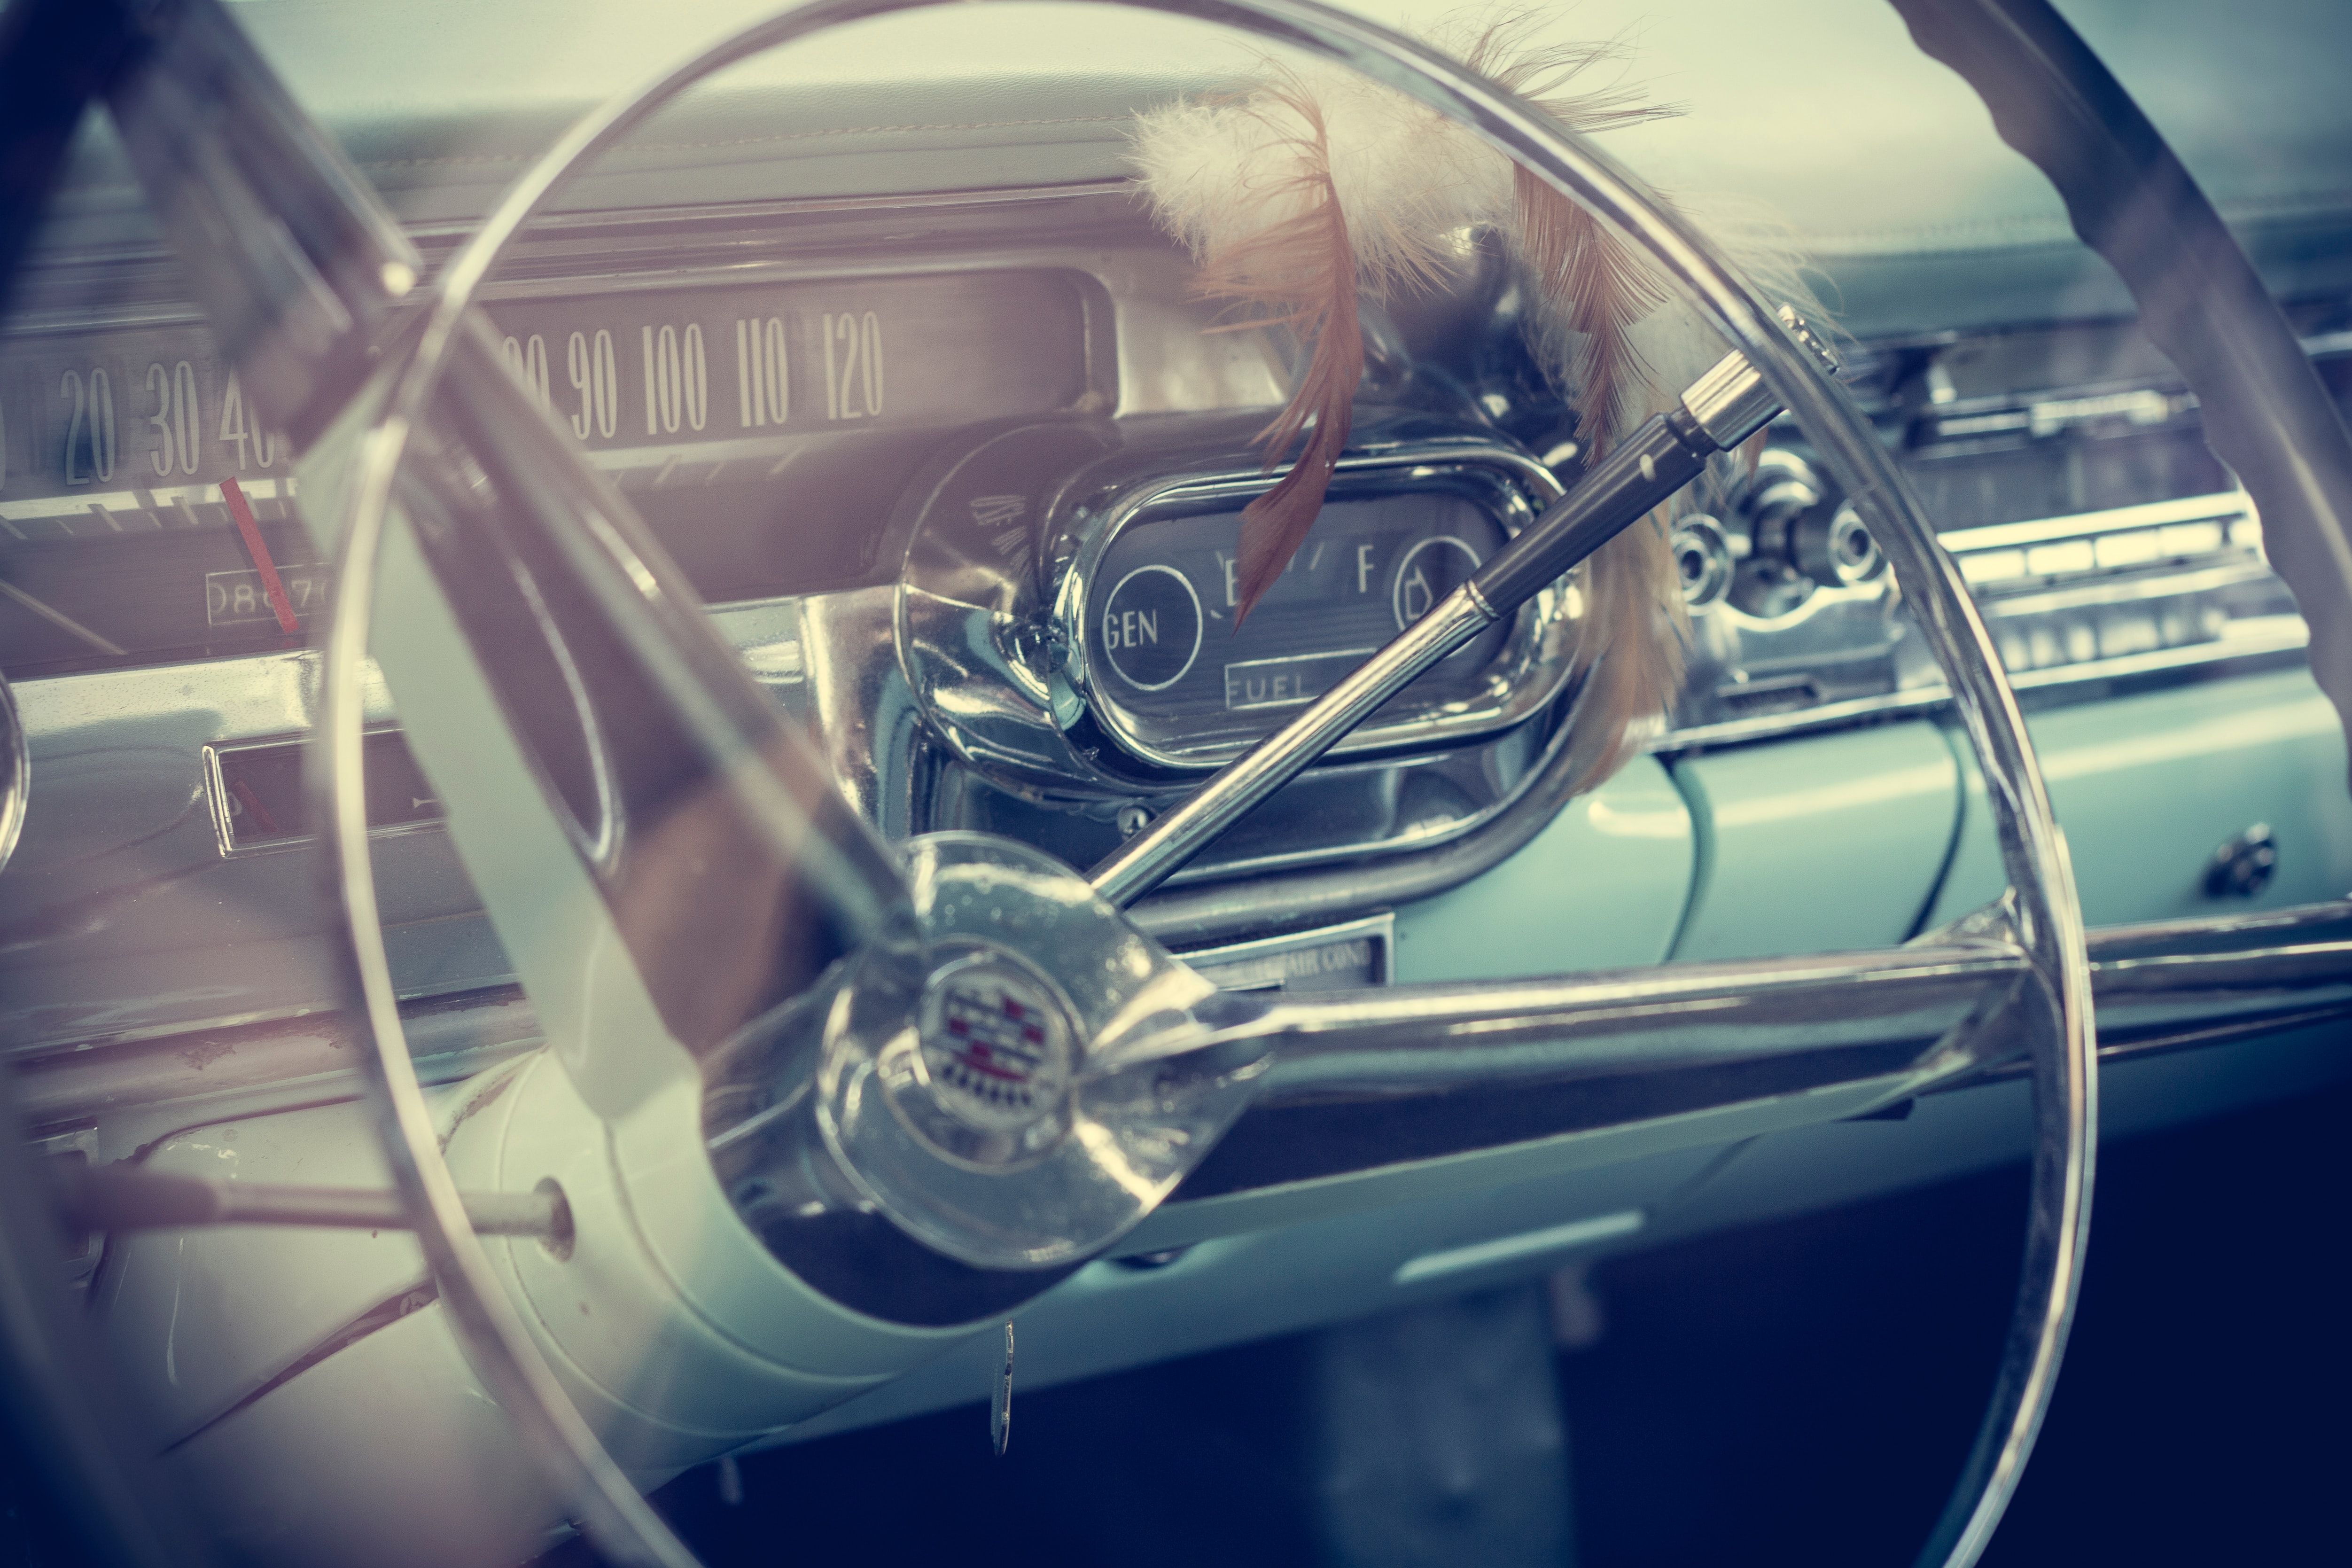 Vintage Cadillac Picture. Download Free Image